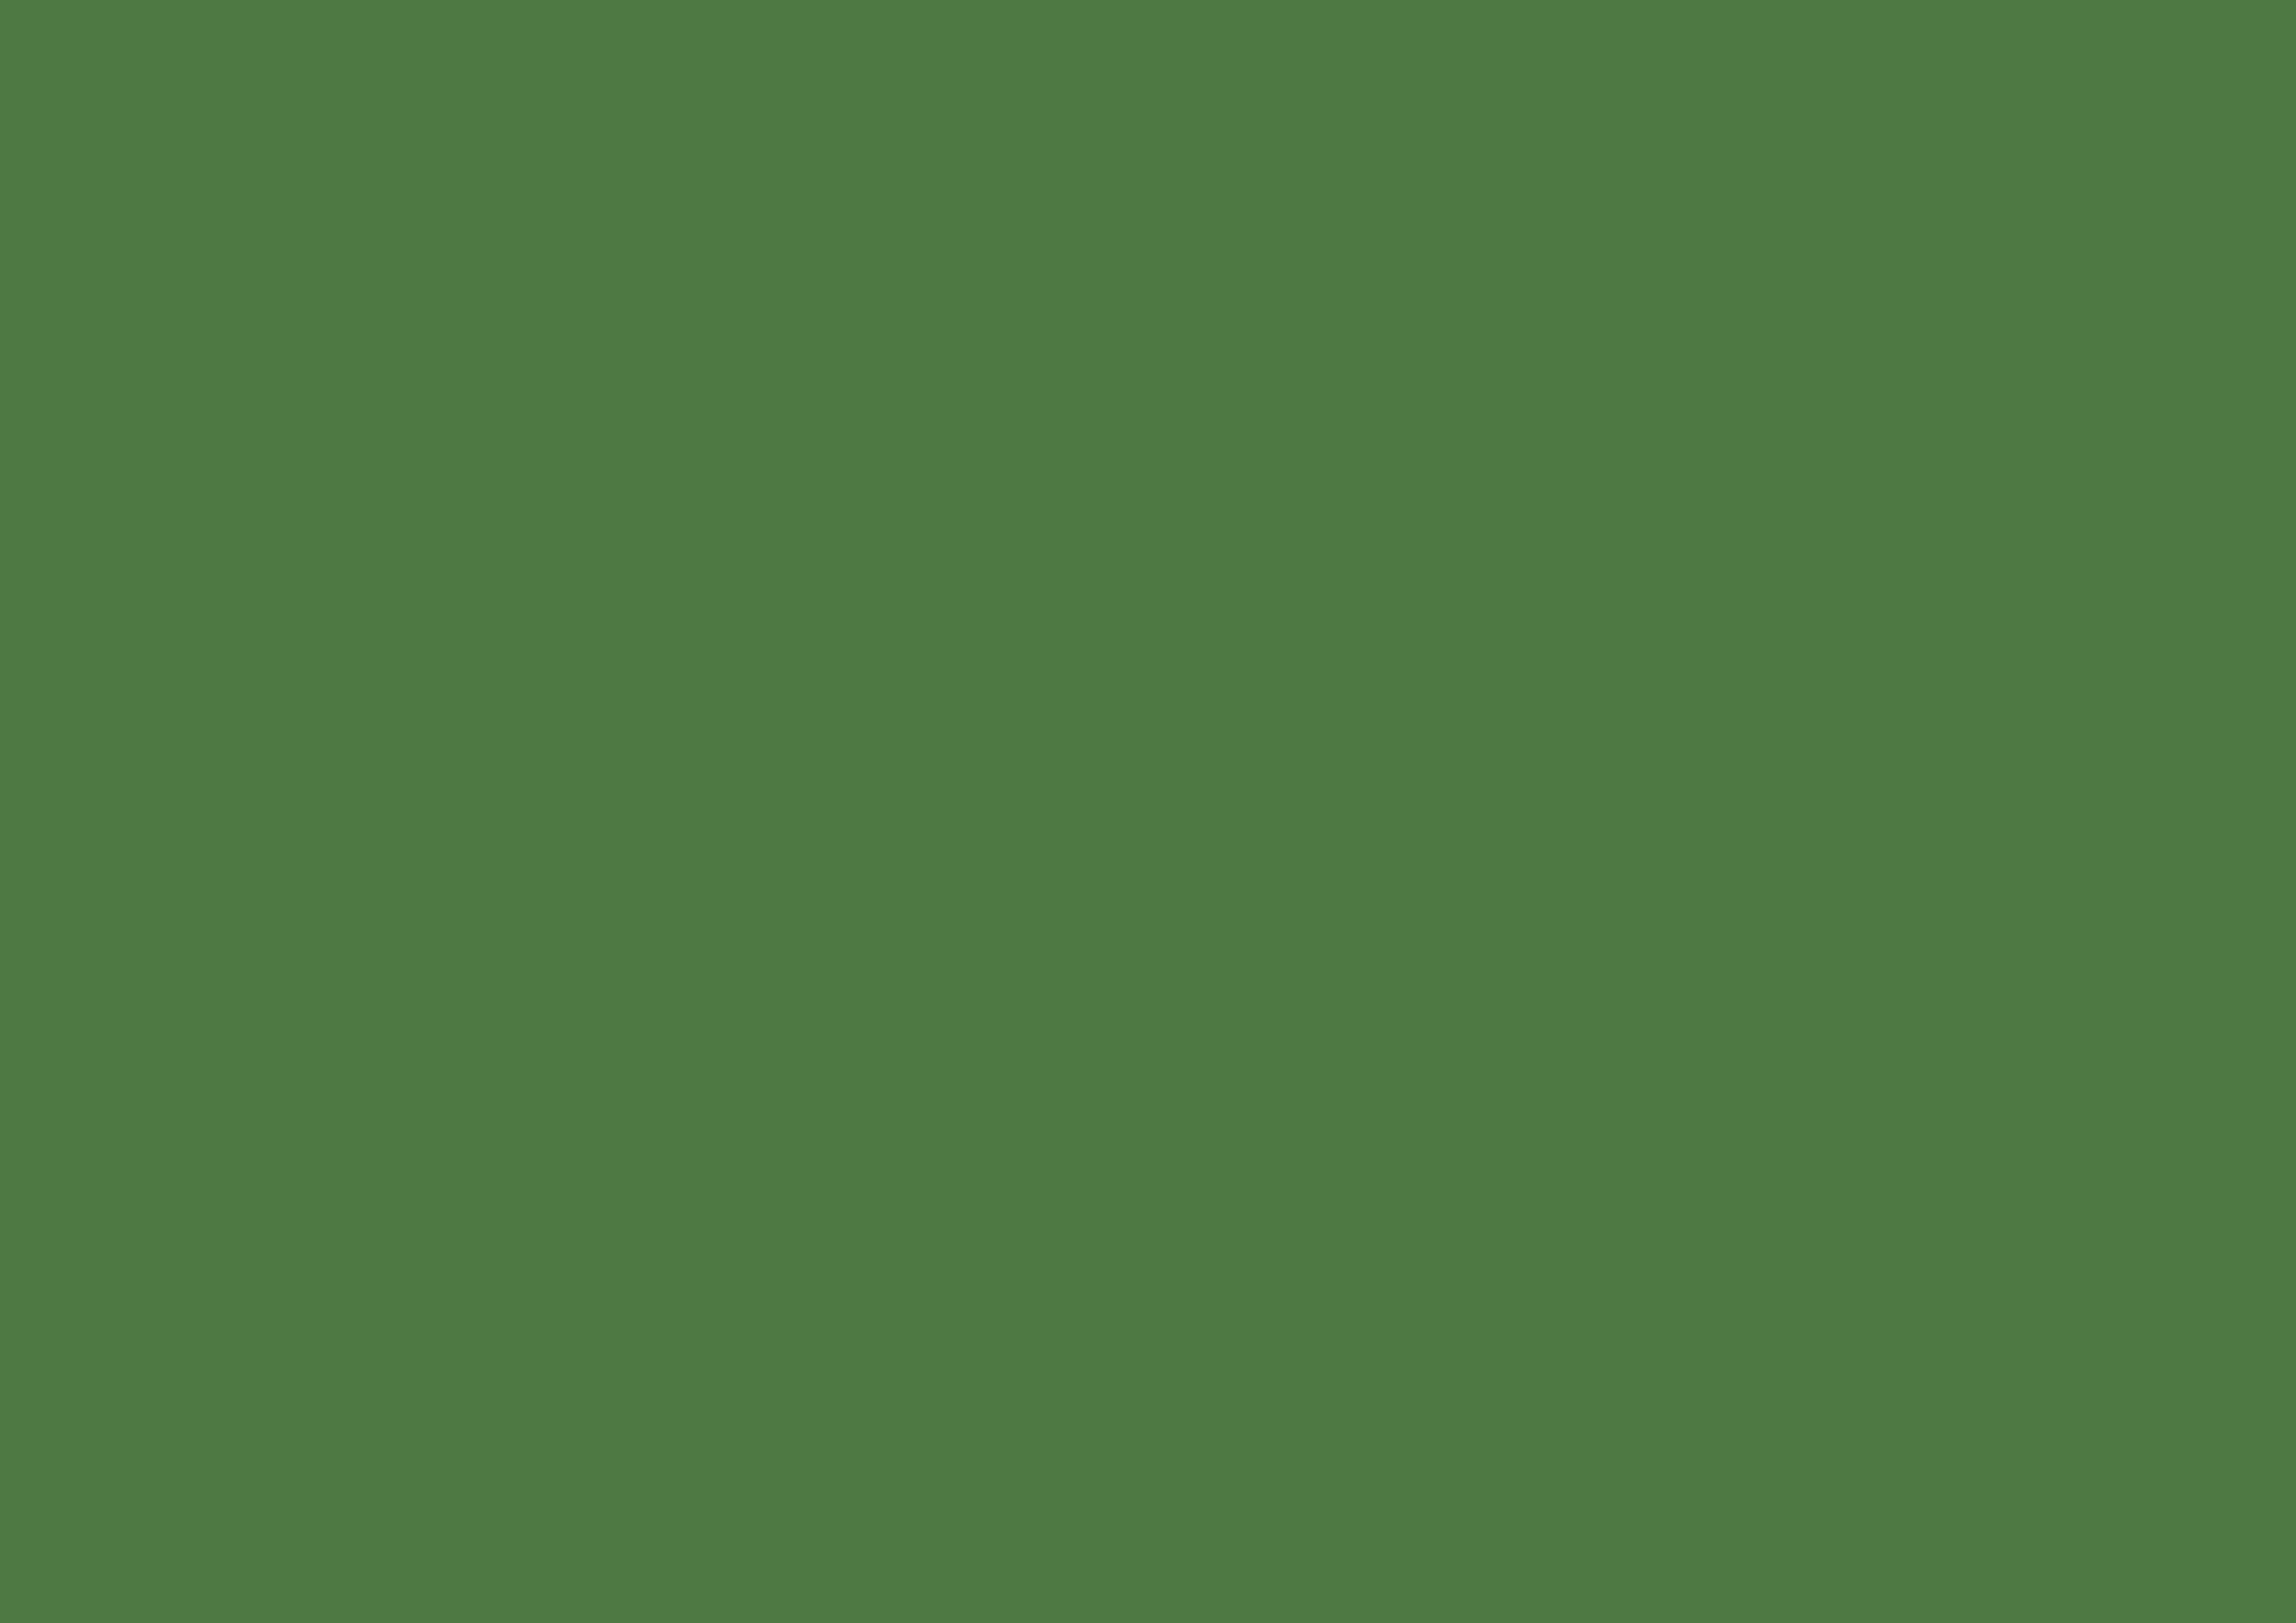 3508x2480 Fern Green Solid Color Background